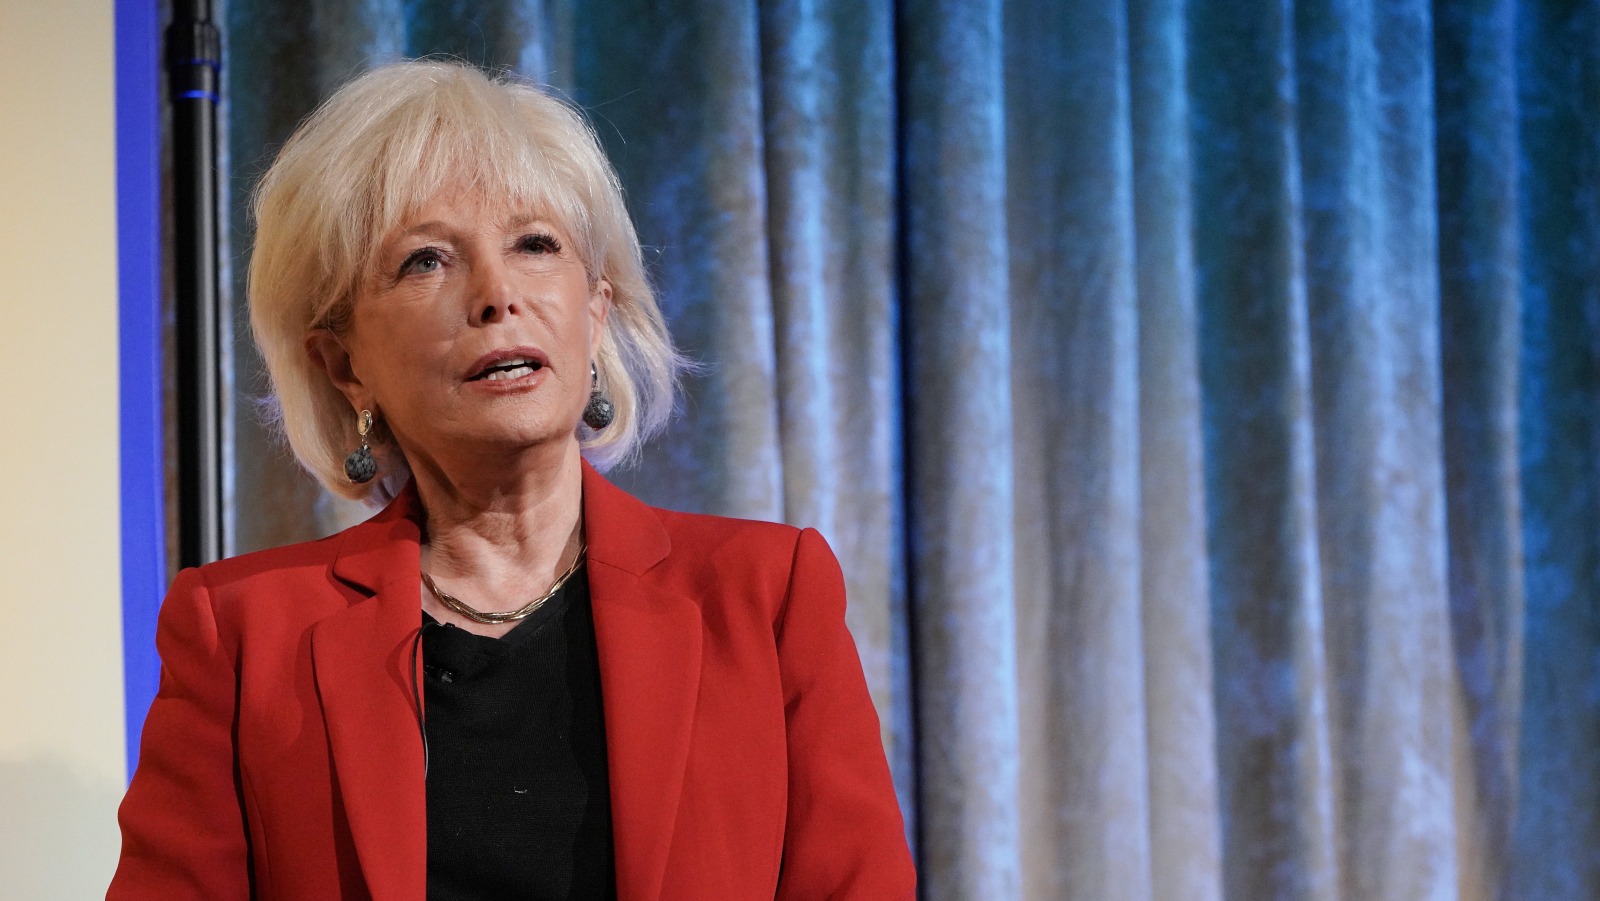 Here's Why Lesley Stahl Felt Insulted By Trump & Pence During Thei...